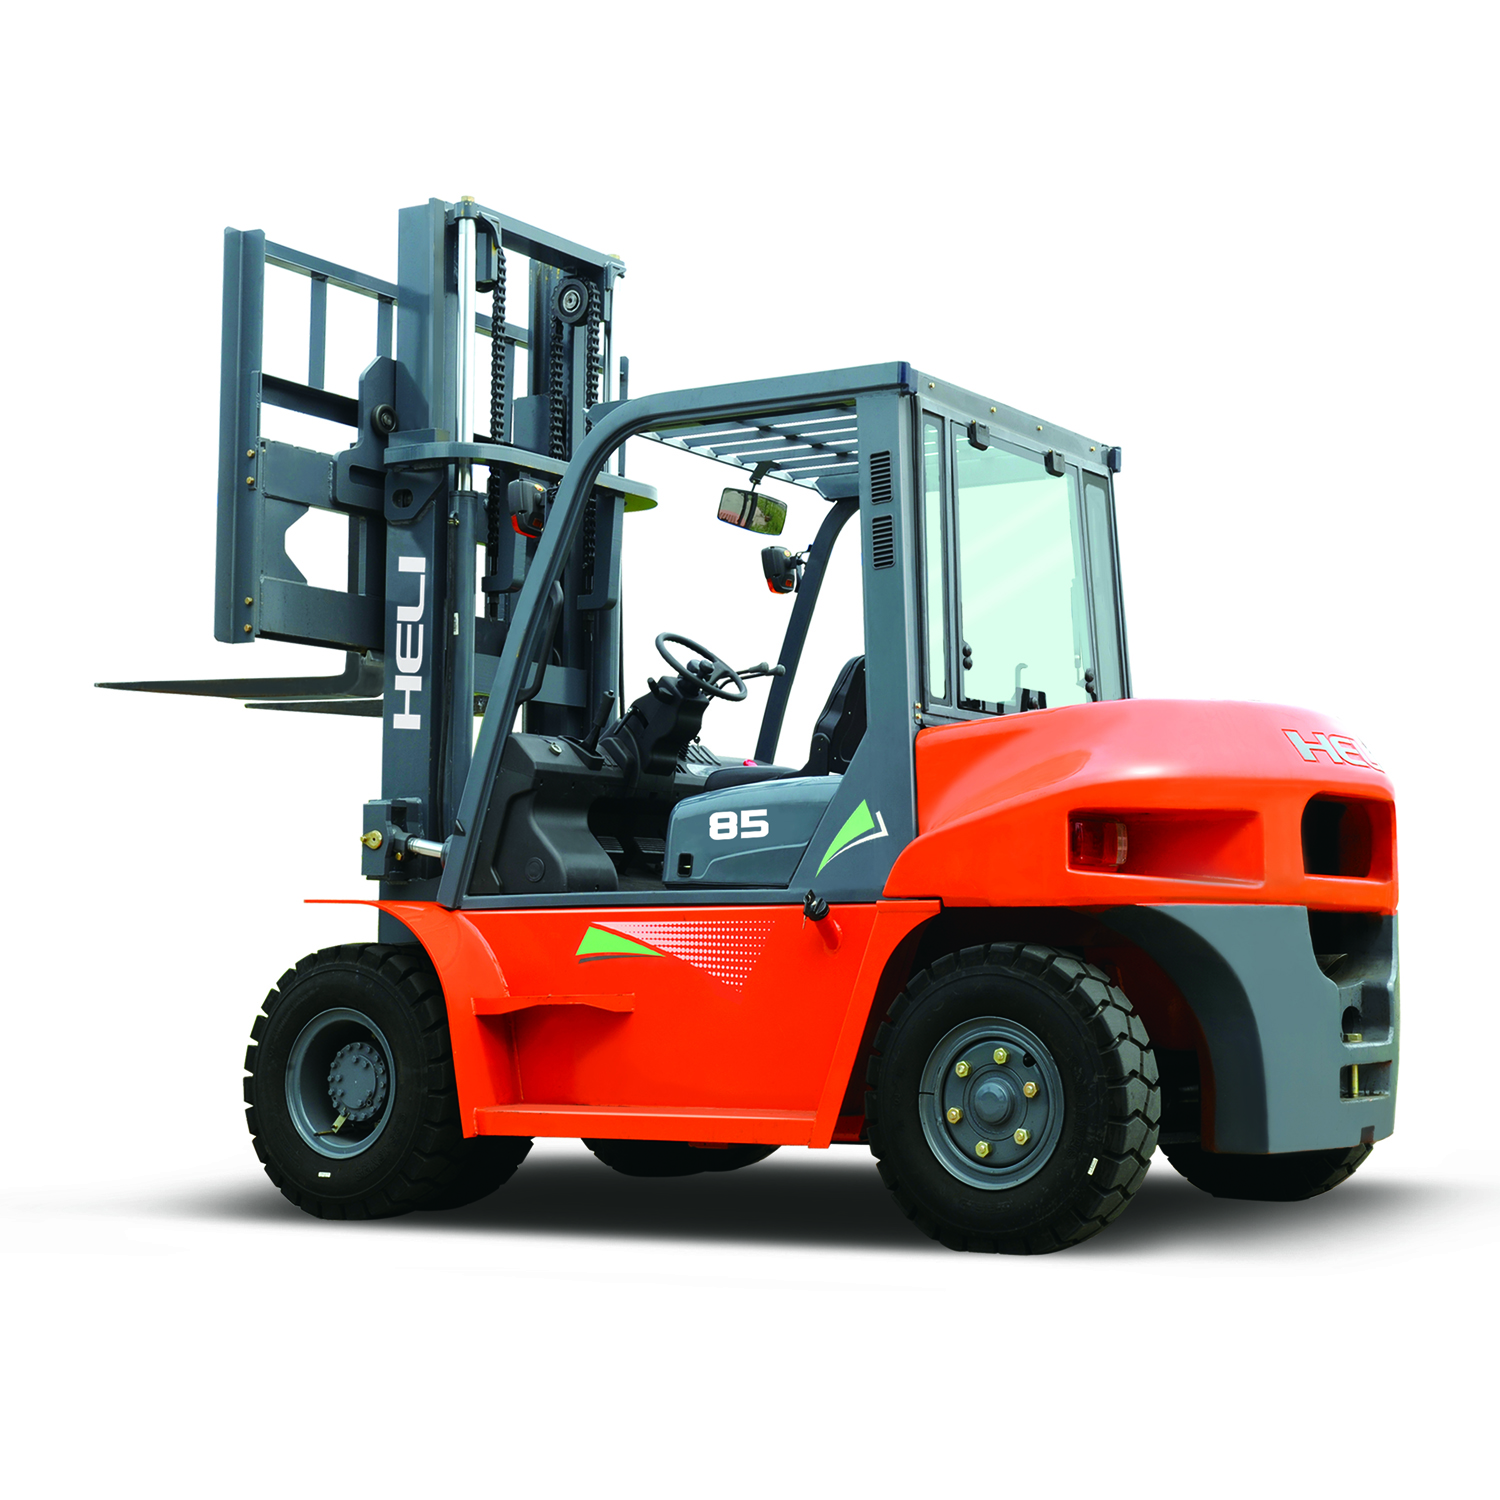 G-series-IC-8.5t-forklift-NO2